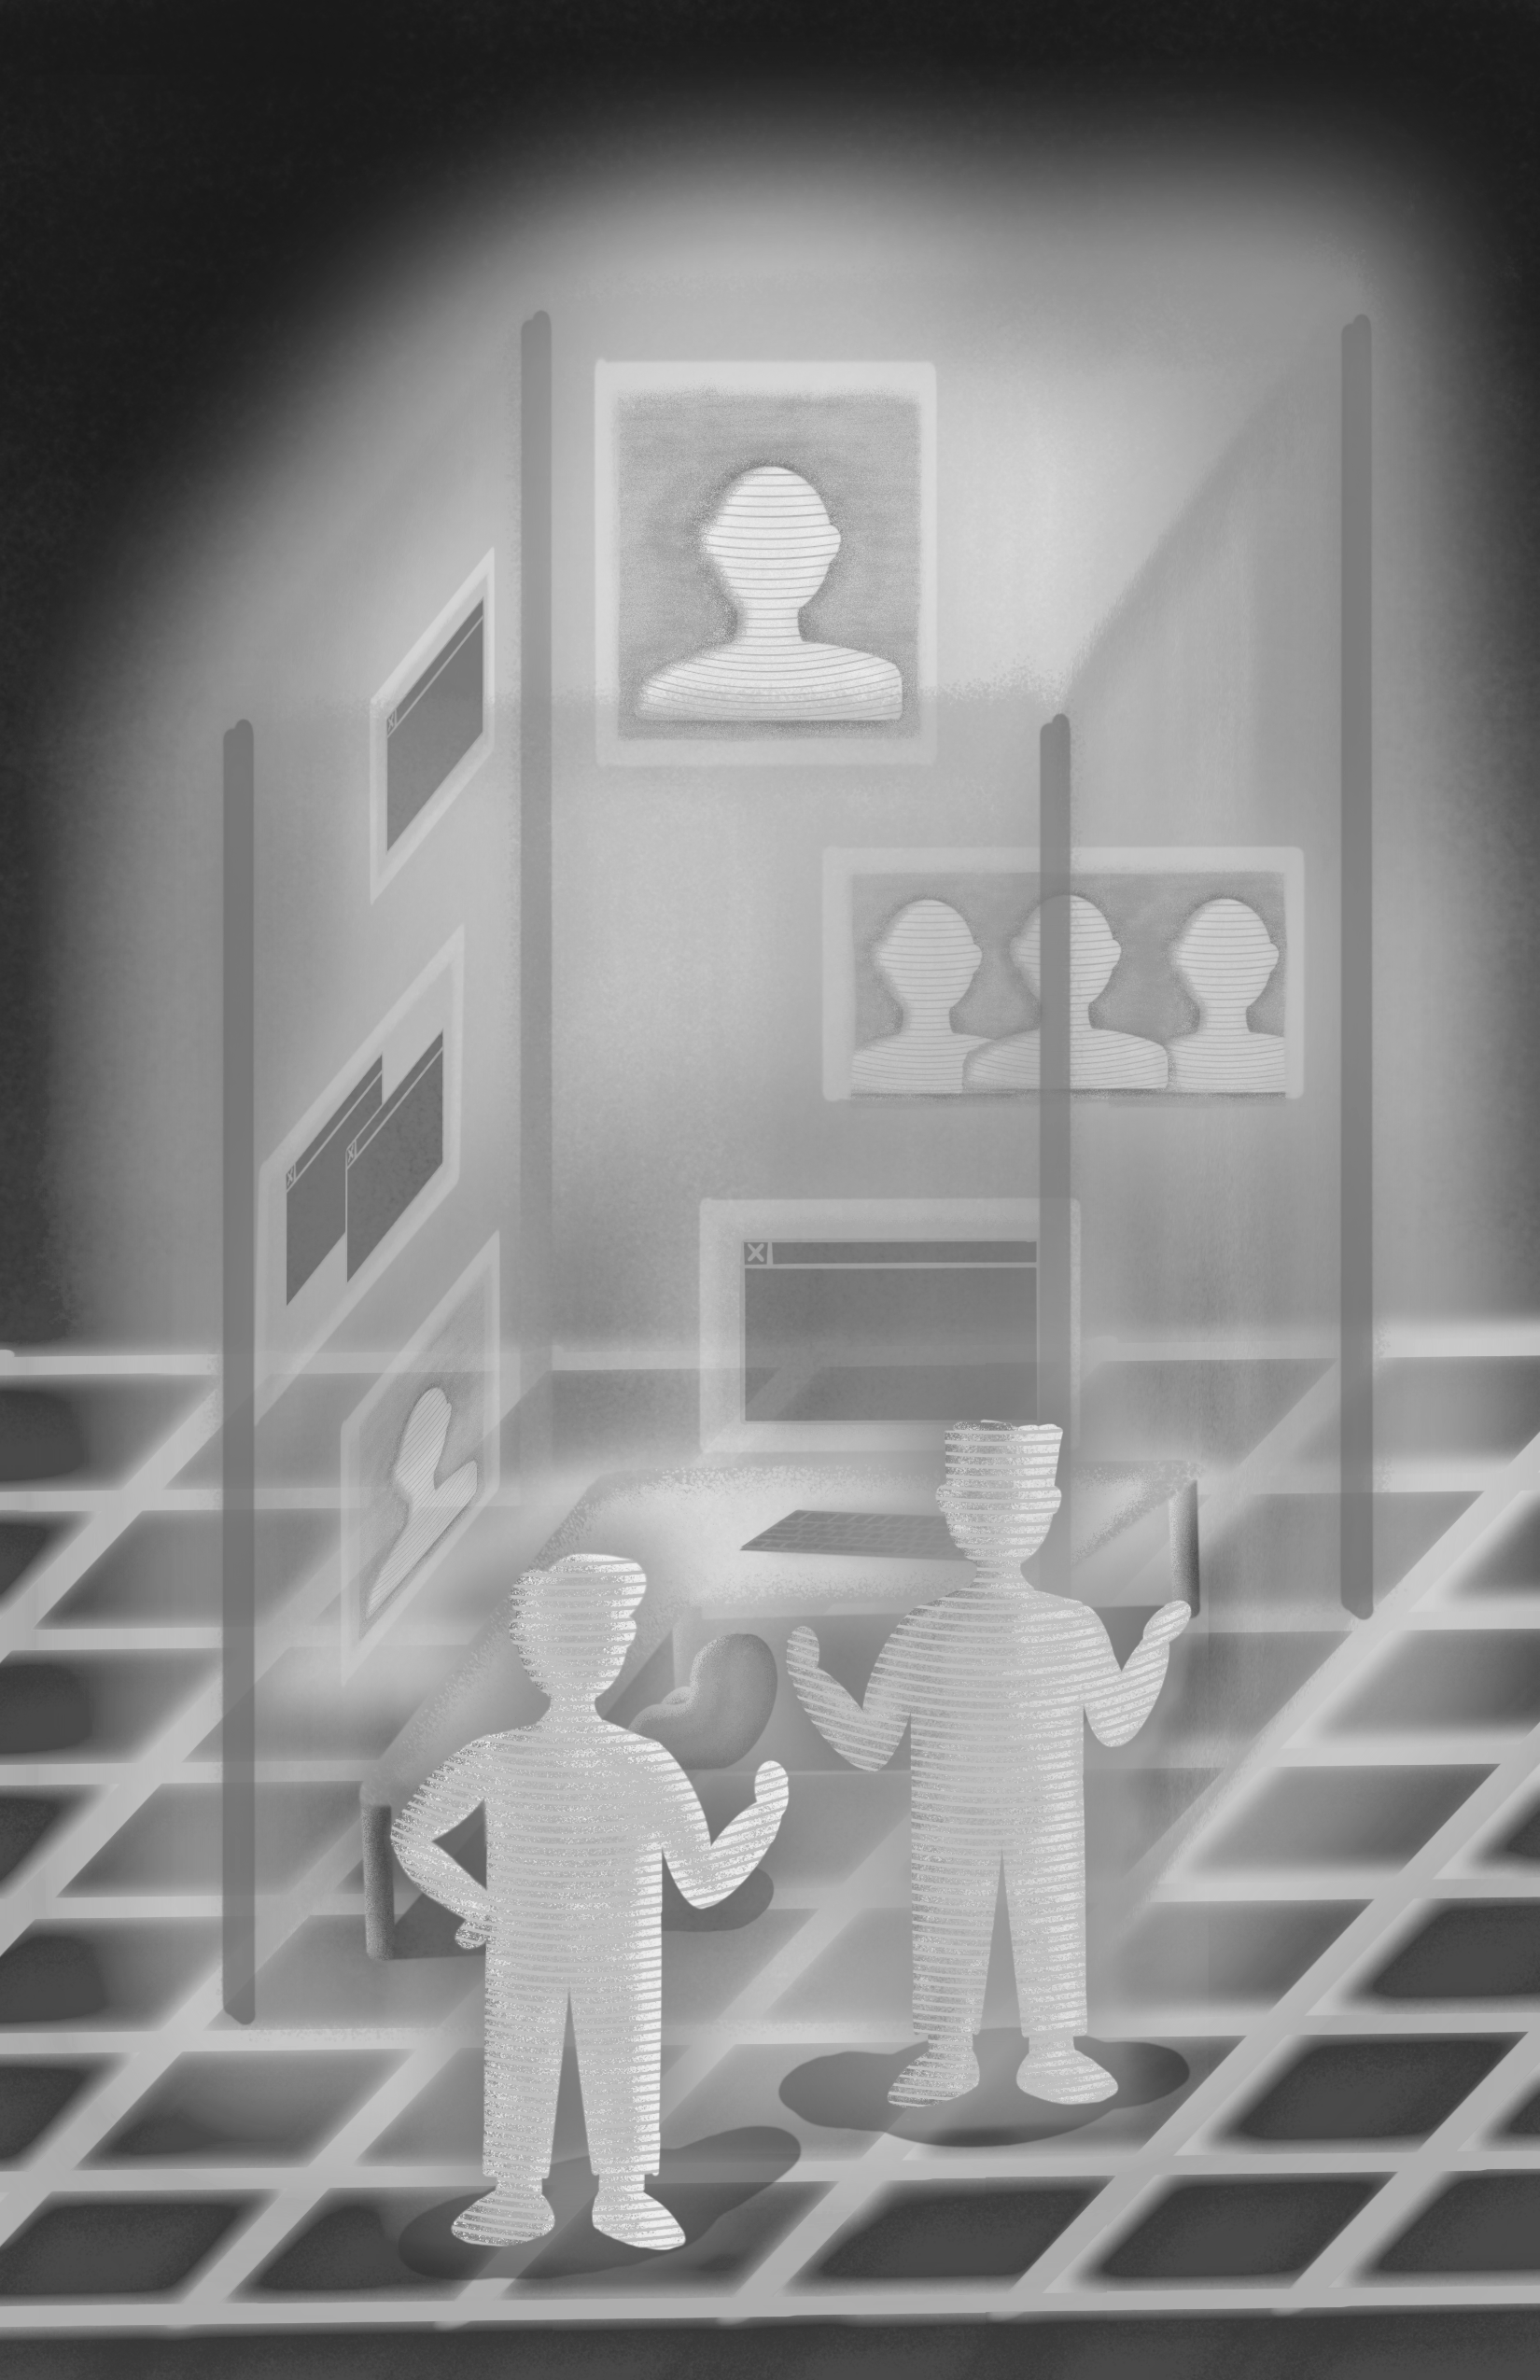 Stylized illustration of workers in semi-transparent cubicles